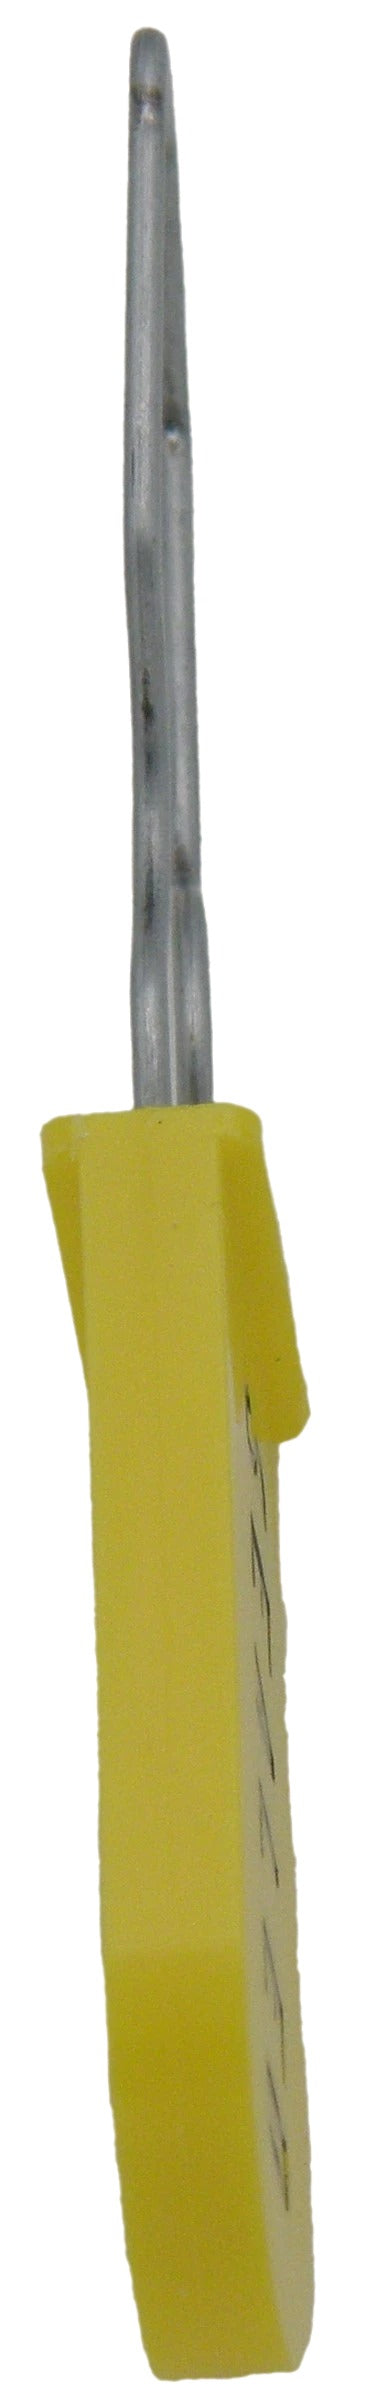 High Security Padlock Lockout Seal Large Shackle Pack of 100 Yellow